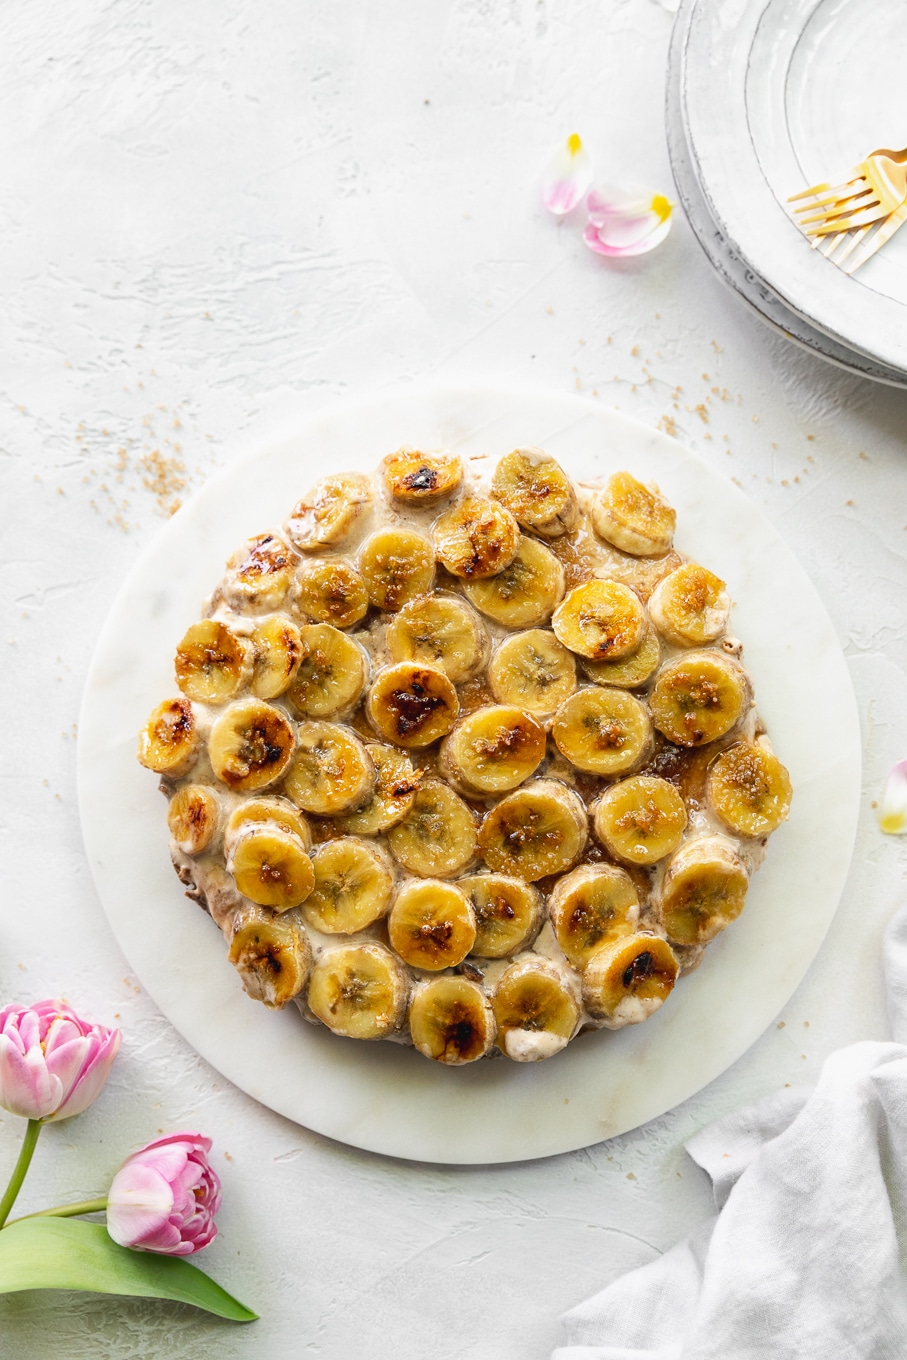 Overhead shot of a brûléed banana pie against a white background with pink tulips in the bottom left